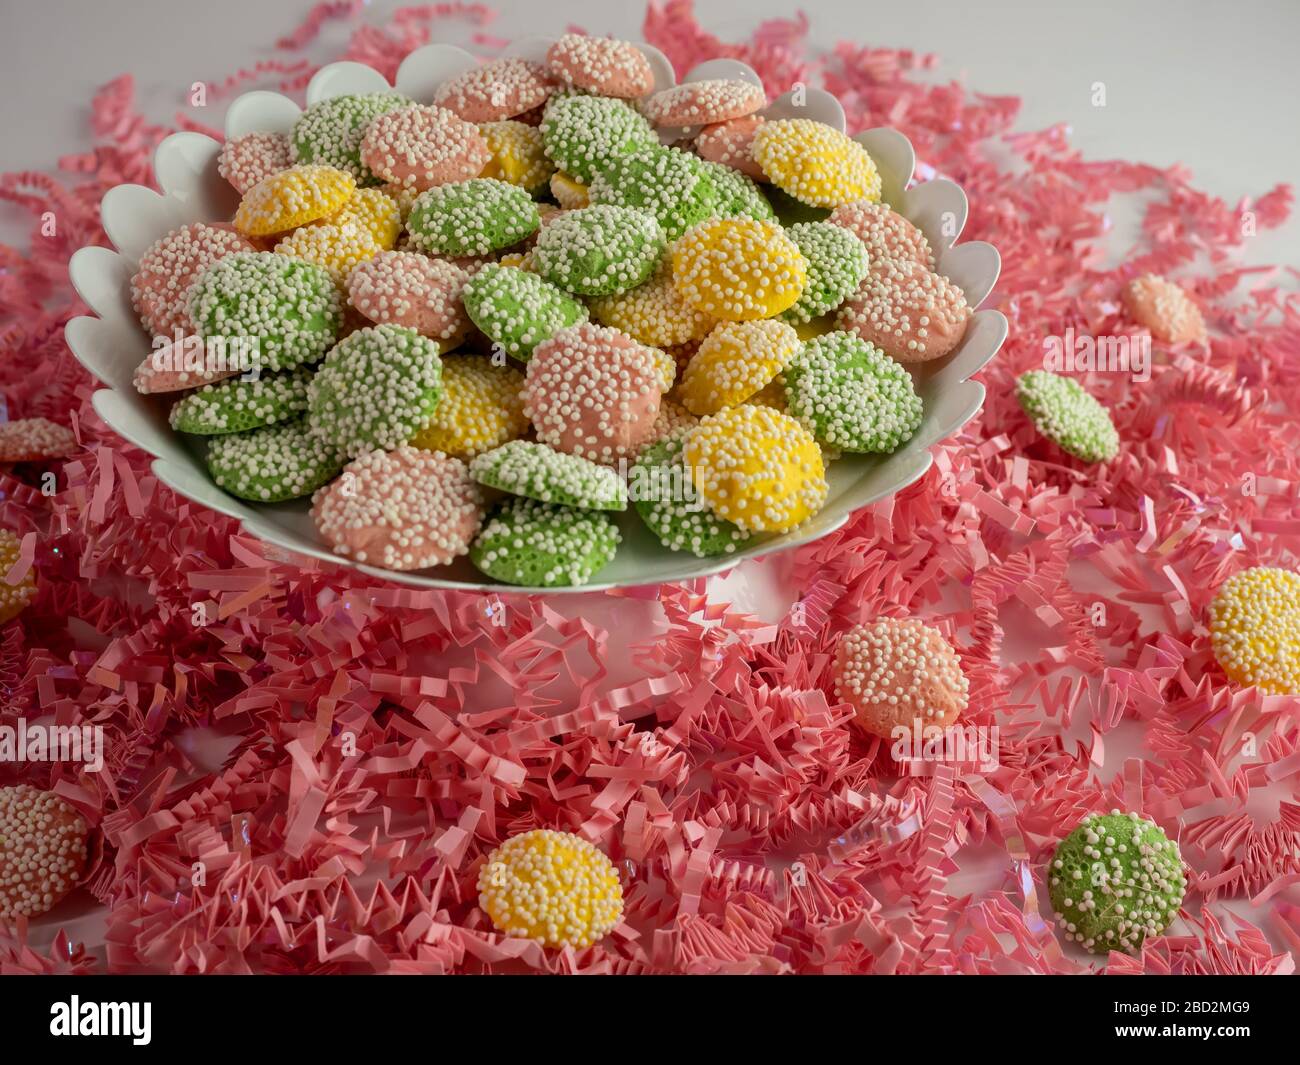 Pastel colored round candies coated with white dot sprinkles in a